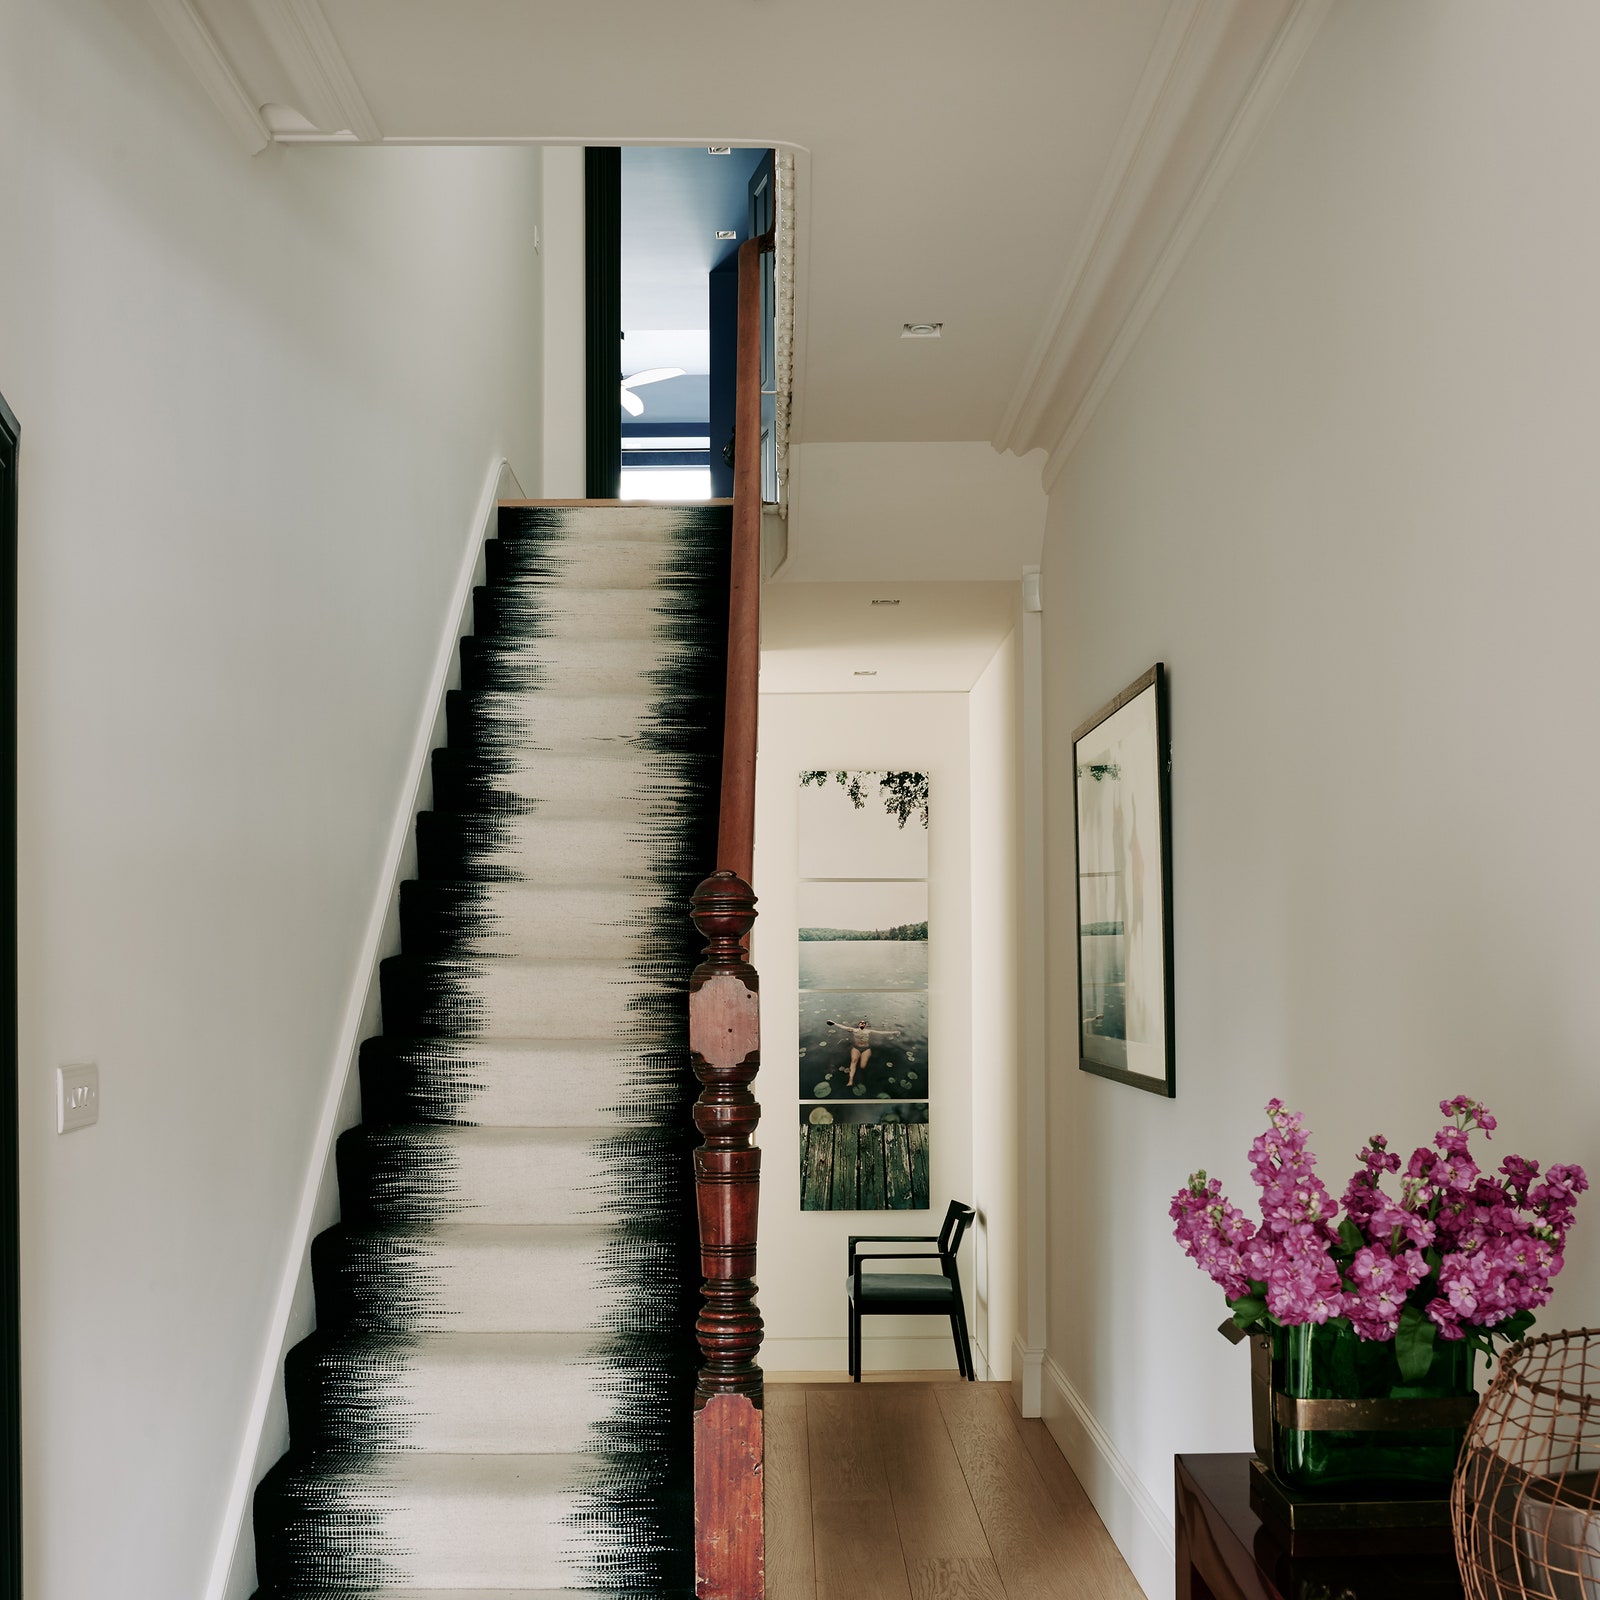 Ideas for stair runners, hallway rugs and stair carpets